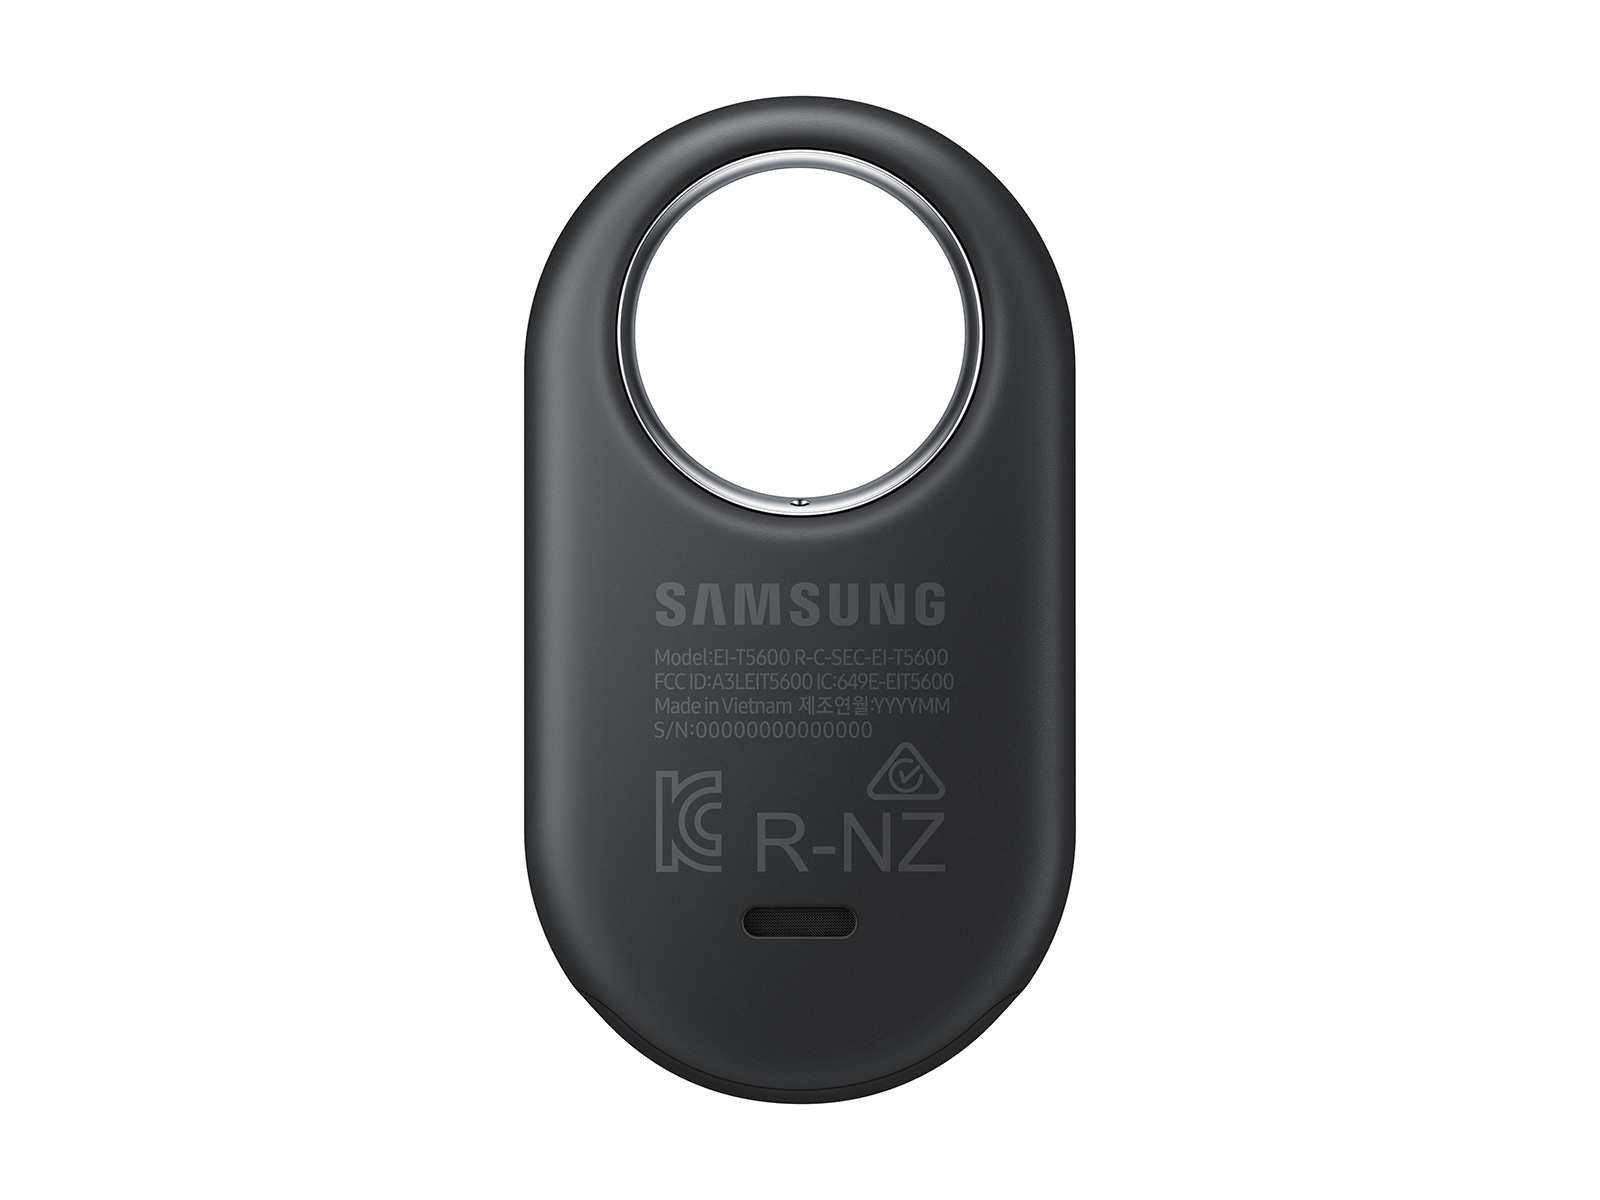  Samsung Smart Tag 2 (2023) Bluetooth + UWB, IP67 Water and Dust  Resistant, Findable via App, 1.5 Year Battery Life -, Includes Carrying  Pouch (White) : Electronics